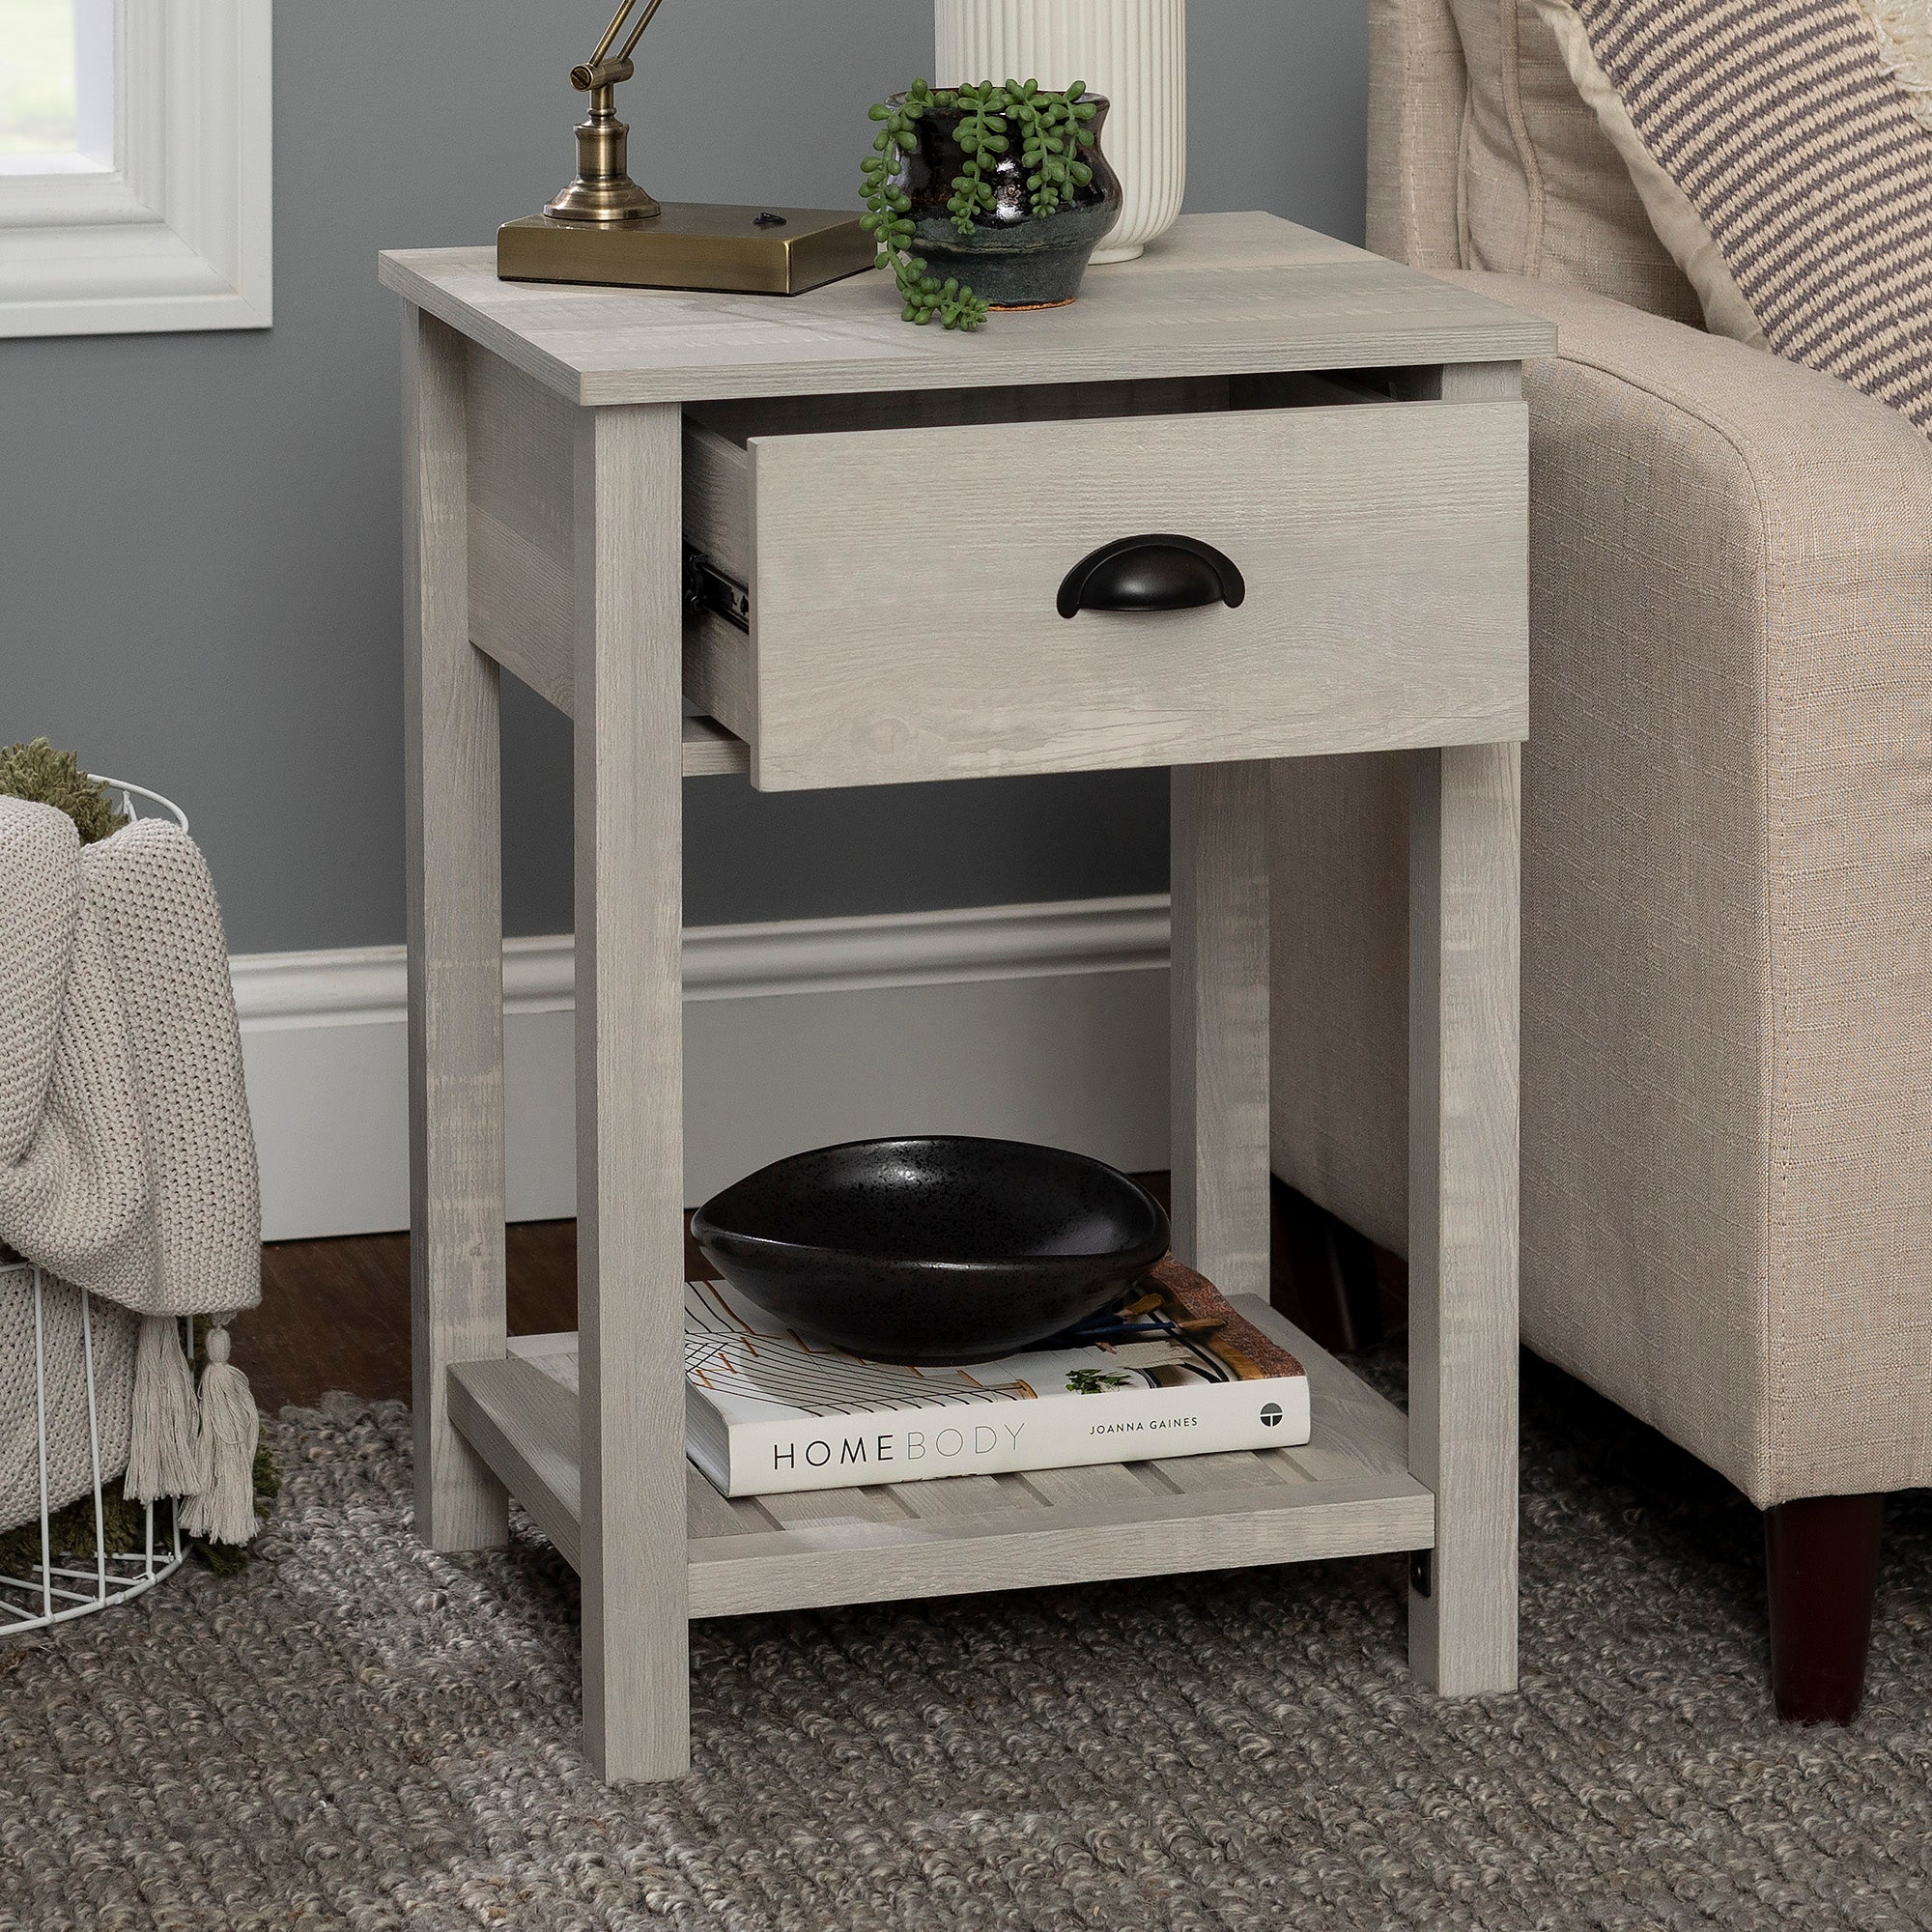 18" Country Single Drawer Nightstand